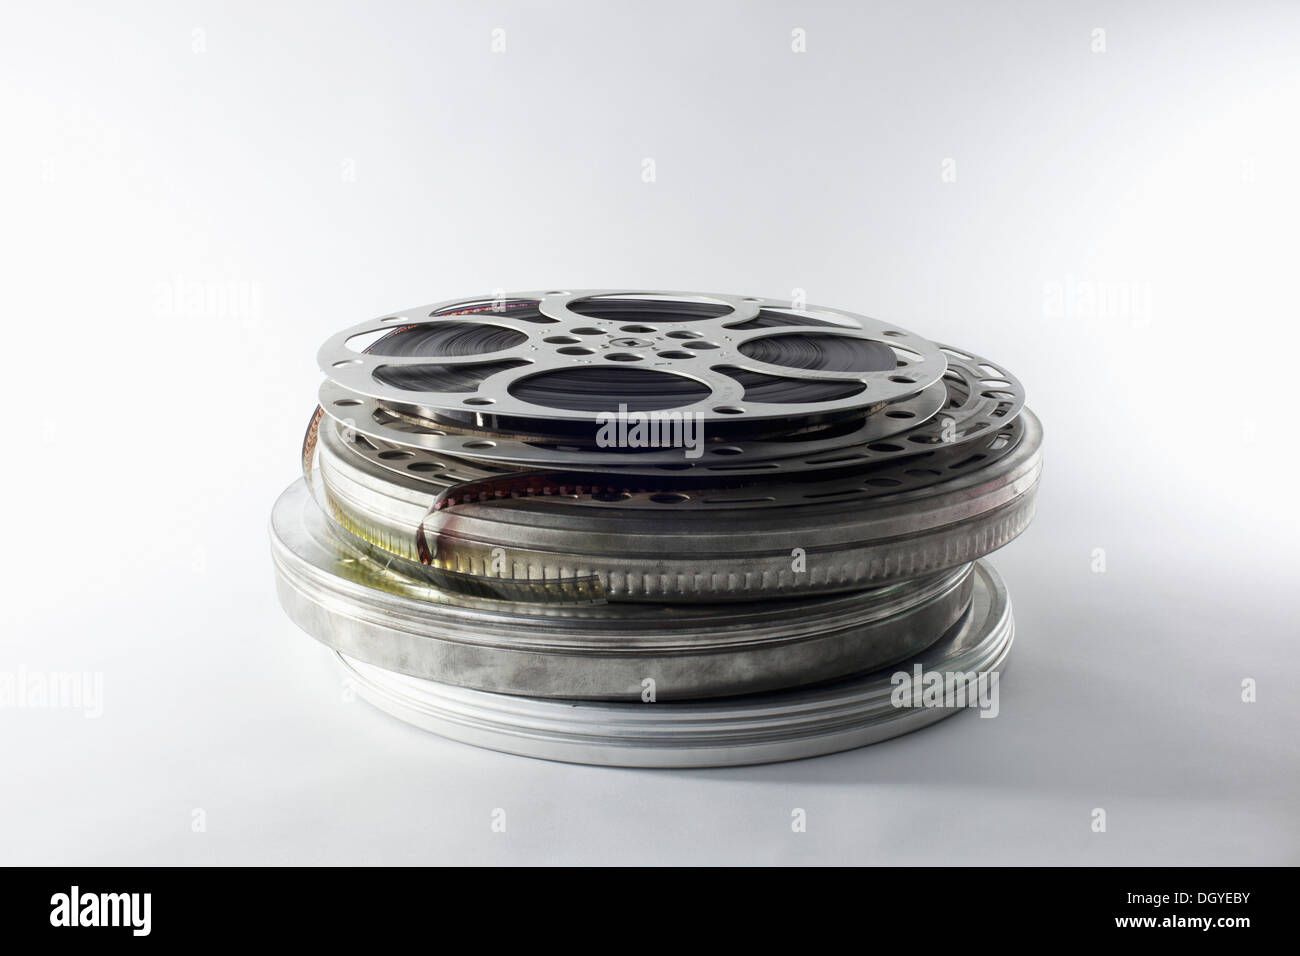 Stack of film reels in canisters Stock Photo